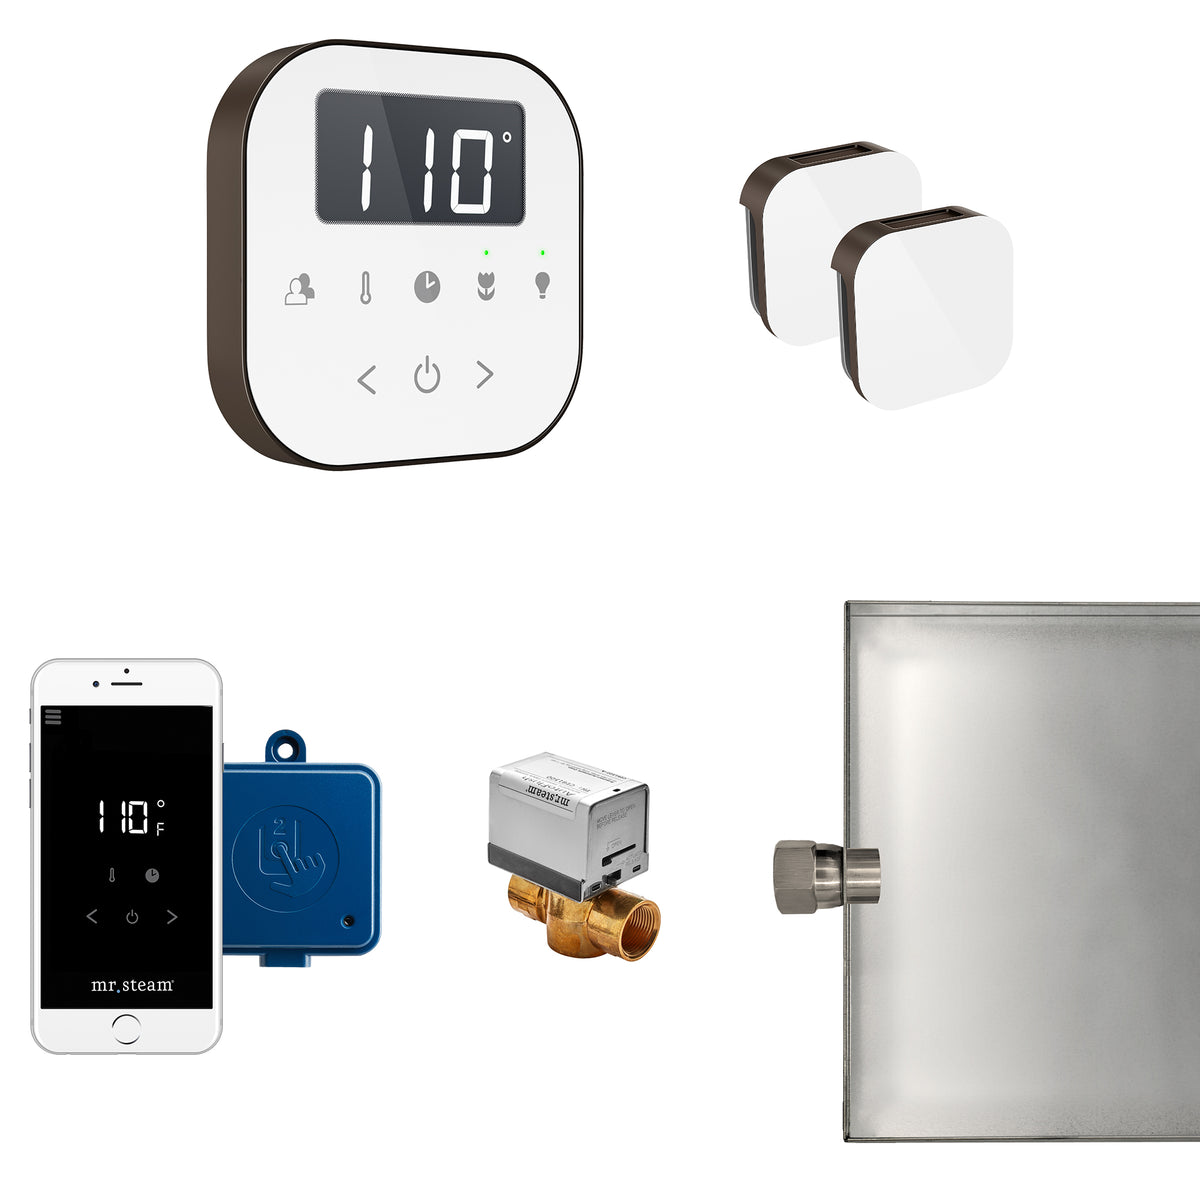 ABUTLERXW-OR_Mr. Steam_AirButler Max Steam Shower Control Package with AirTempo Control and Aroma Glass SteamHead